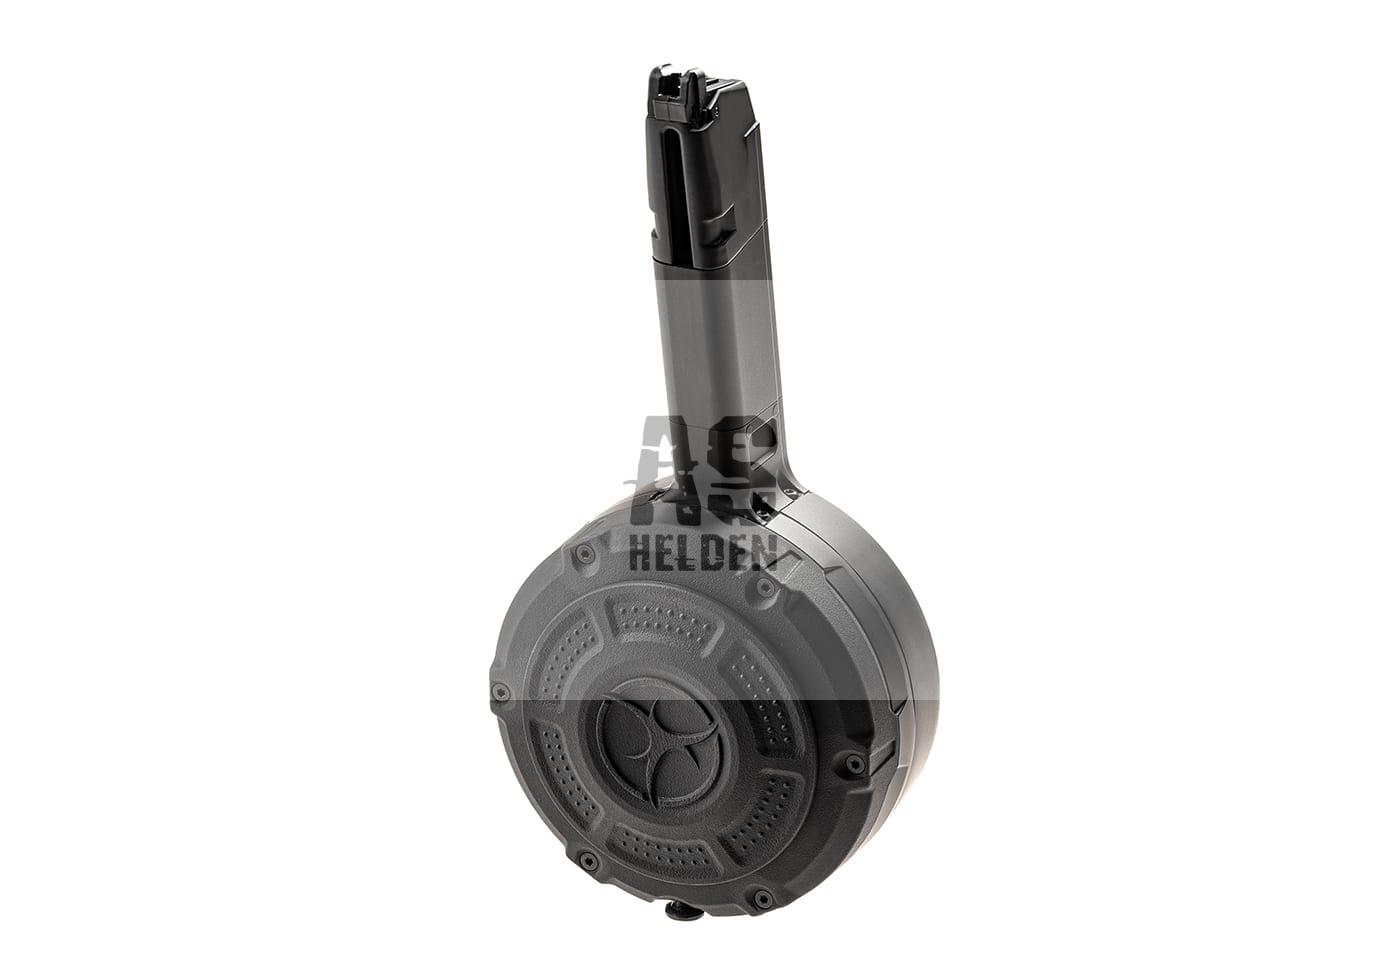 Drum Magazine AAP01 GBB 350rds - (Action Army)